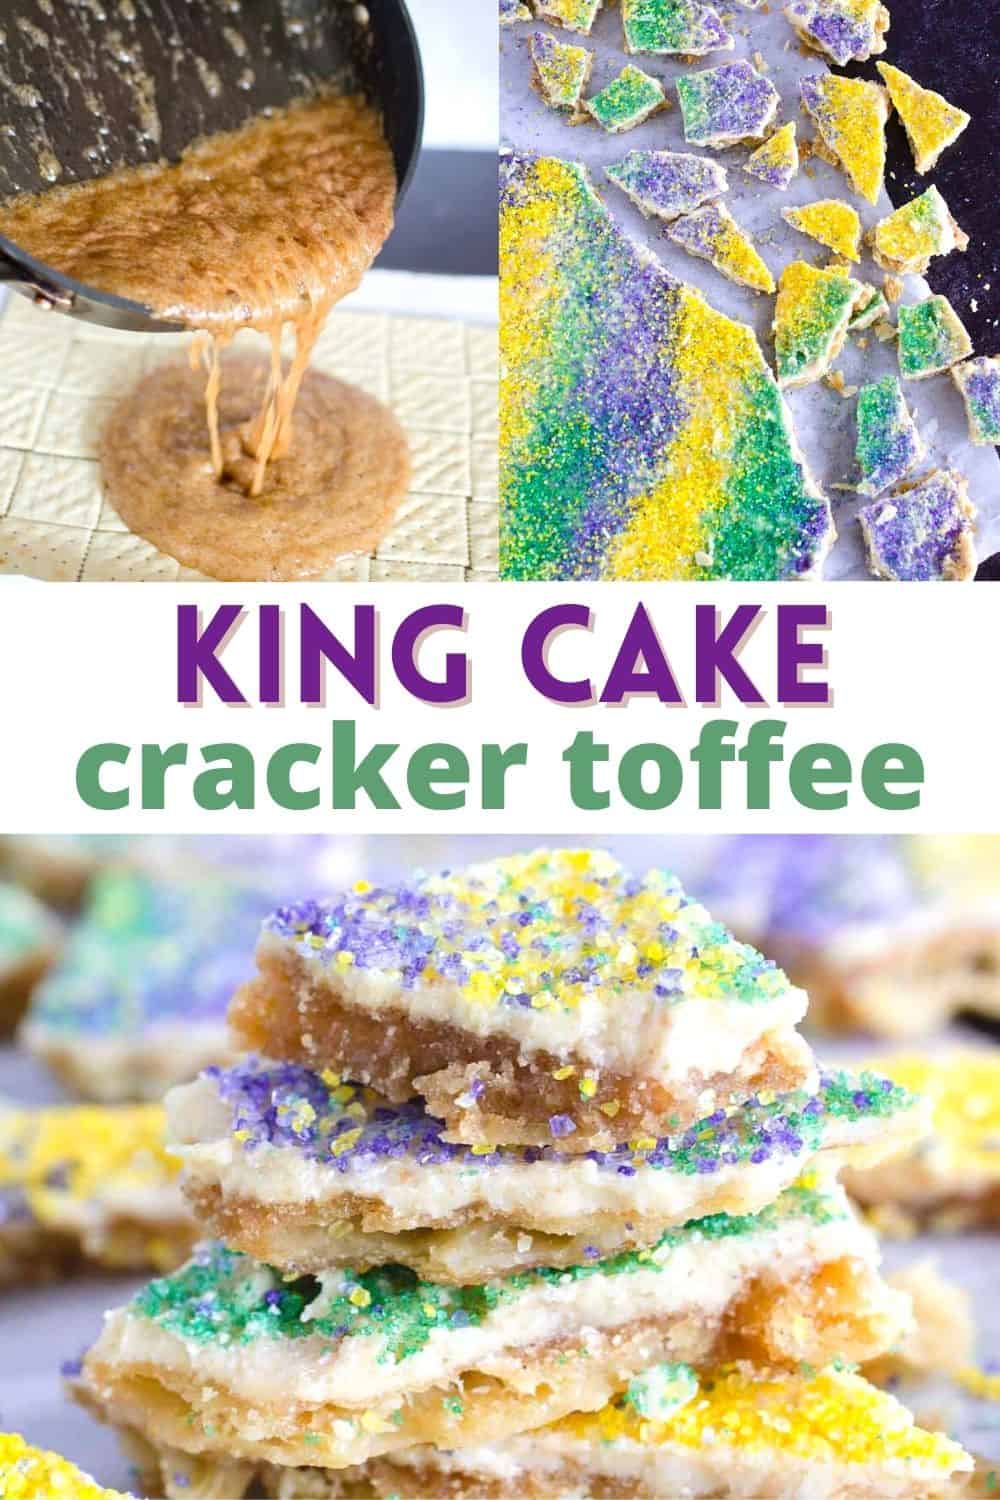 This cracker candy or "crack candy" is a fun and EASY recipe to celebrate Mardi Gras. With the flavors and colors of a king cake recipe, you can snack on this all Carnival season!